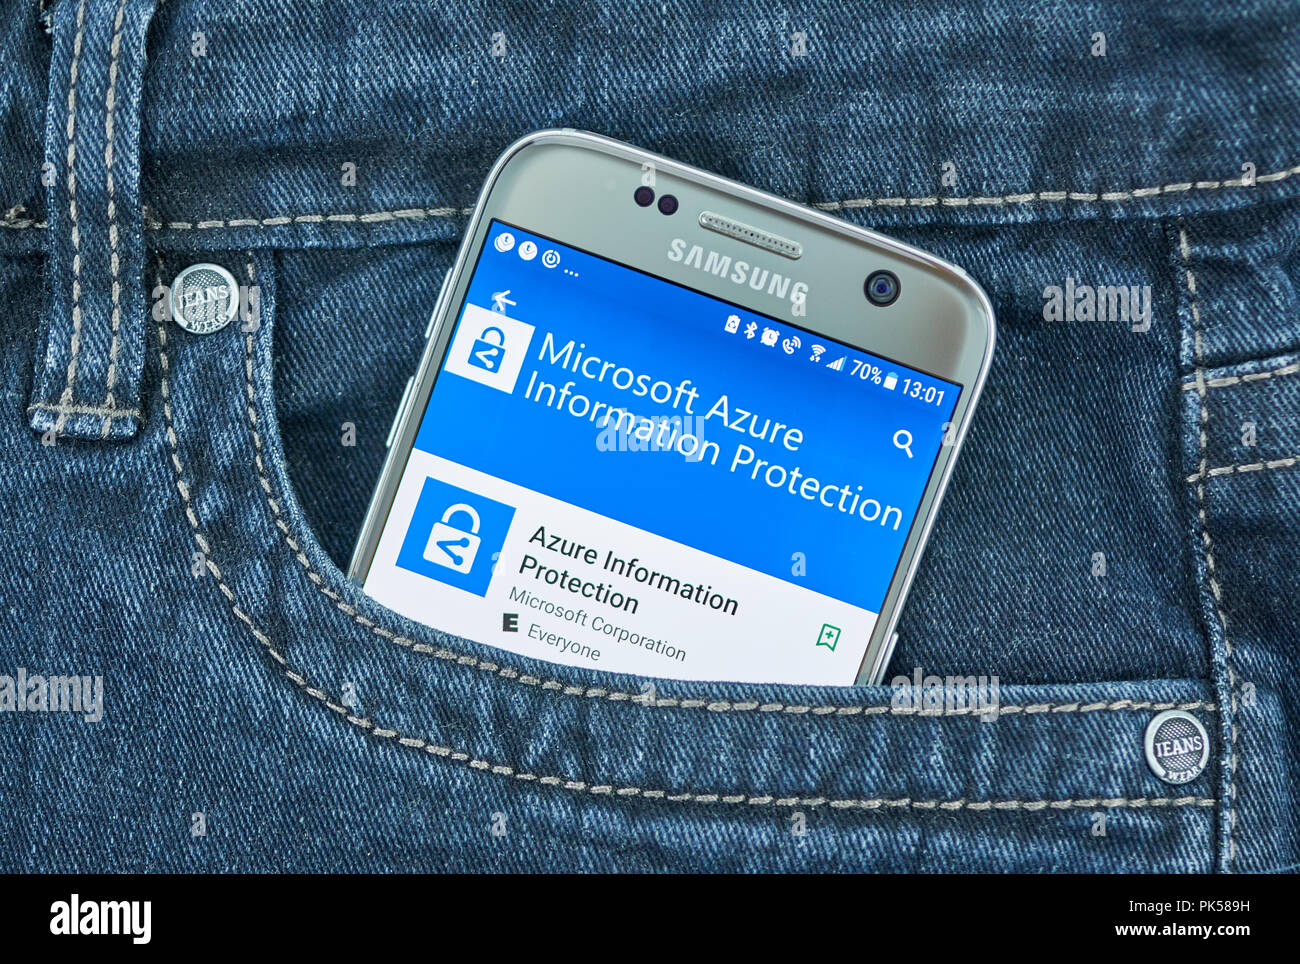 MONTREAL, CANADA - SEPTEMBER 8, 2018: Microsoft Azure Information Protection mobile application on Samsung s7 screen. Stock Photo